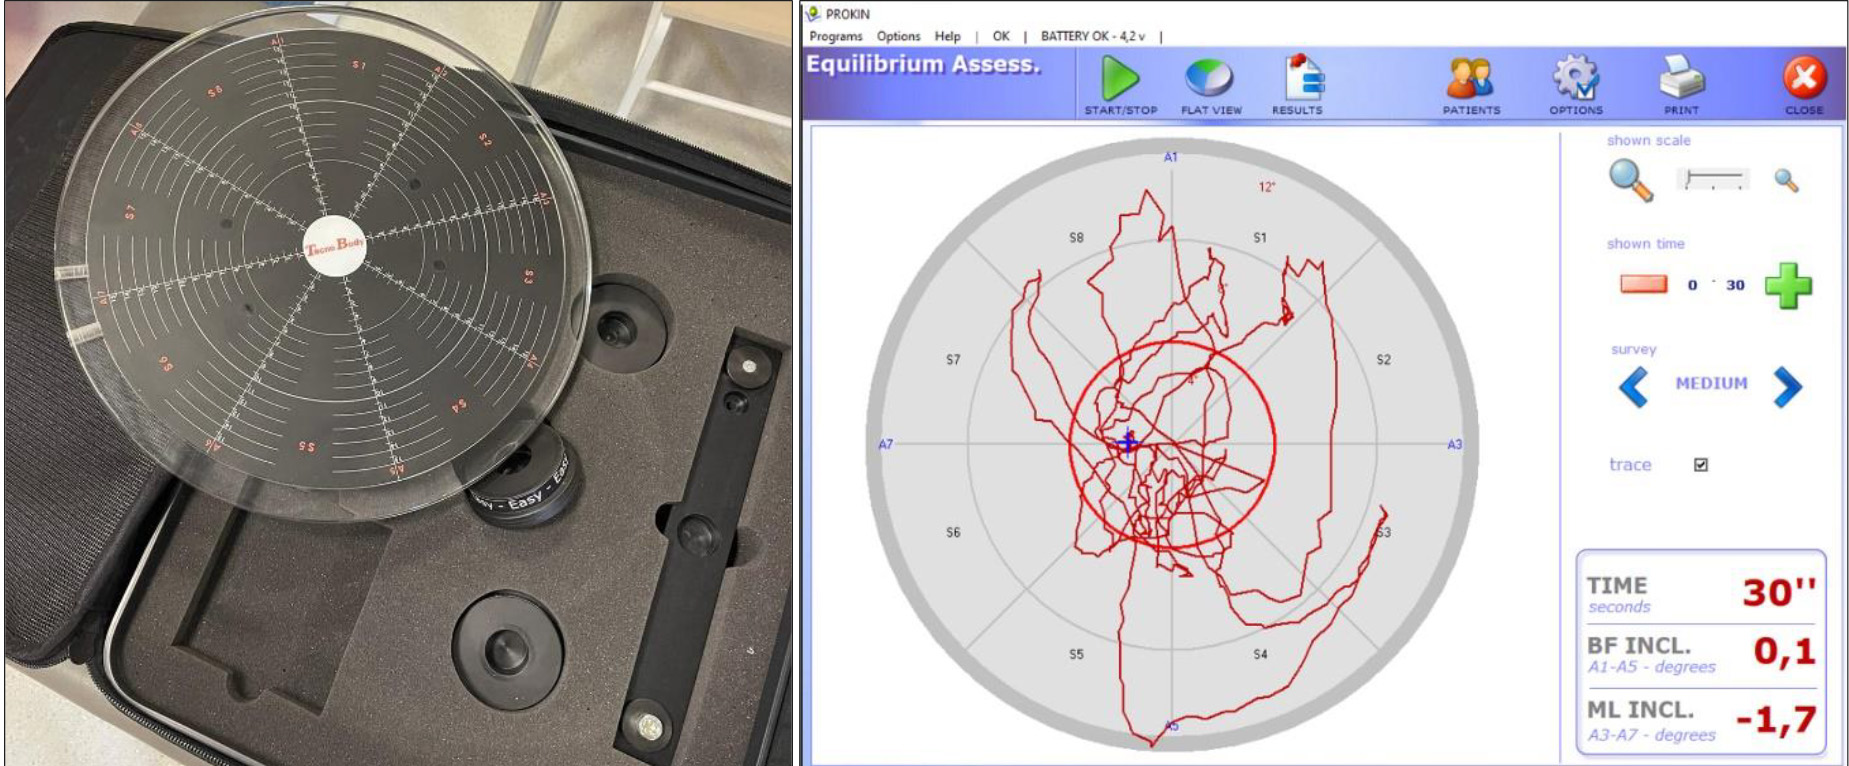 Prokin device and postural stability measurement (red circle represents reference circle).